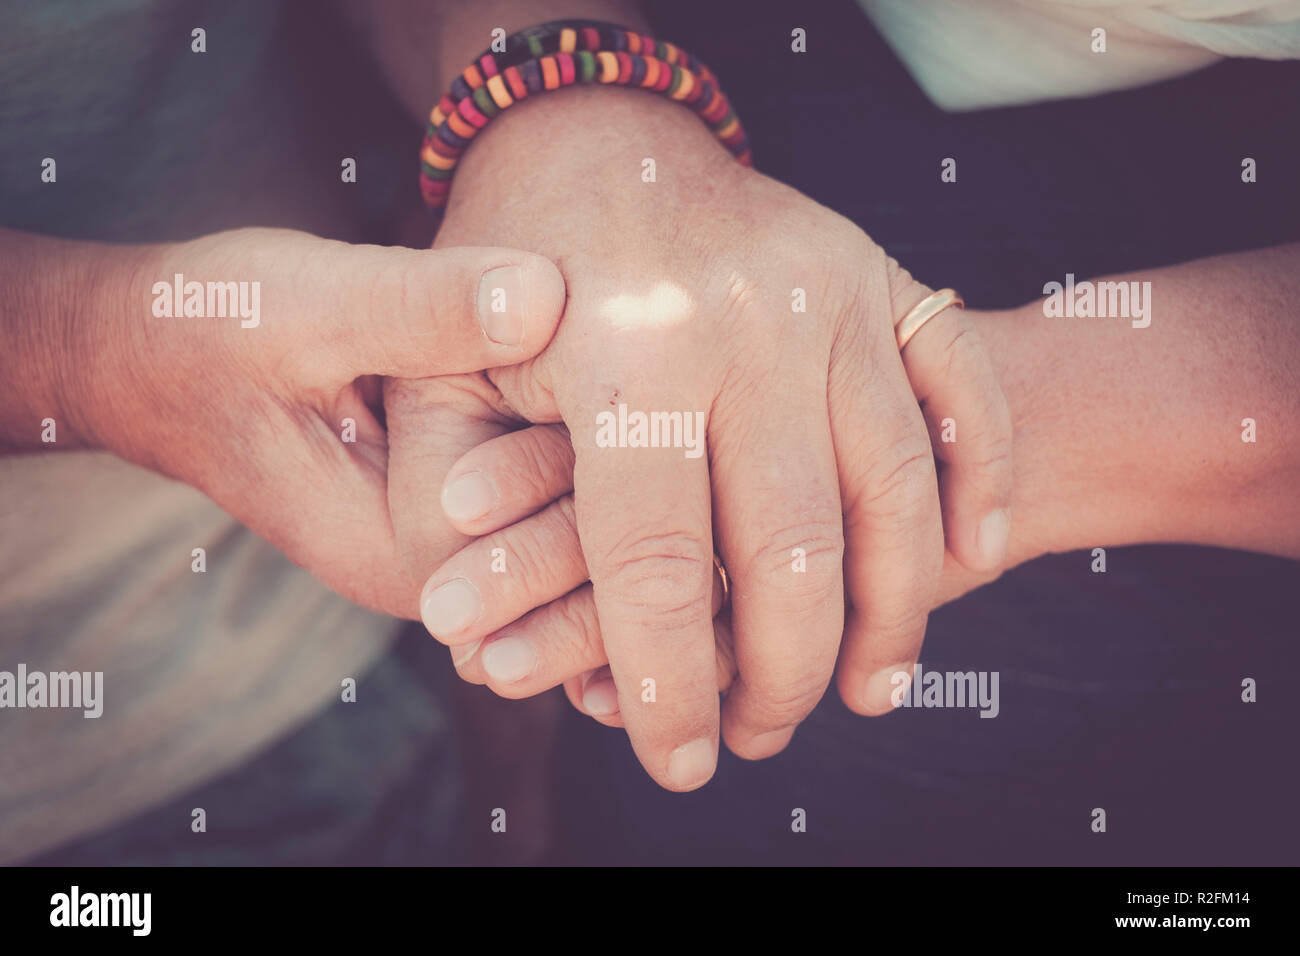 always tegether concept for a pair of elderly senior hands touching and staying together. Love moment for a life together Stock Photo